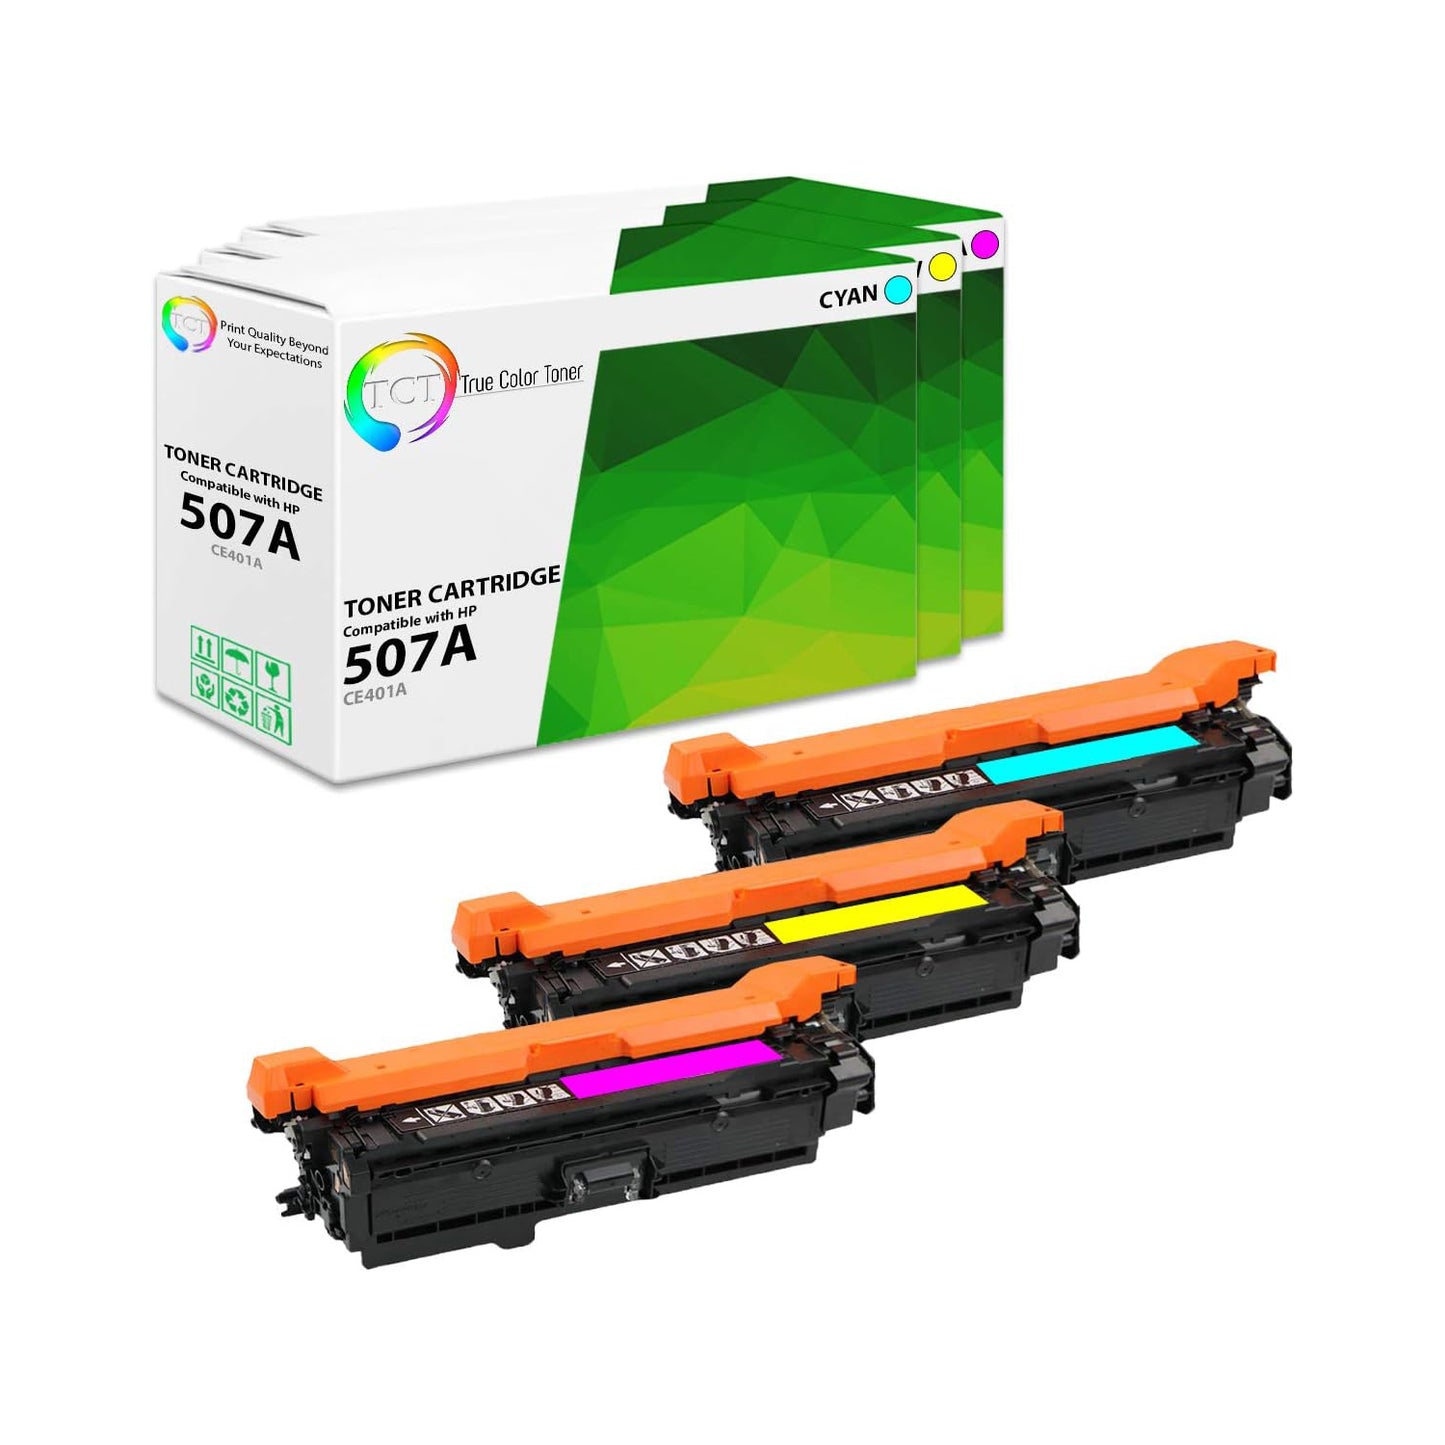 TCT Compatible Toner Cartridge Replacement for the HP 507A Series - 3 Pack (C, M, Y)